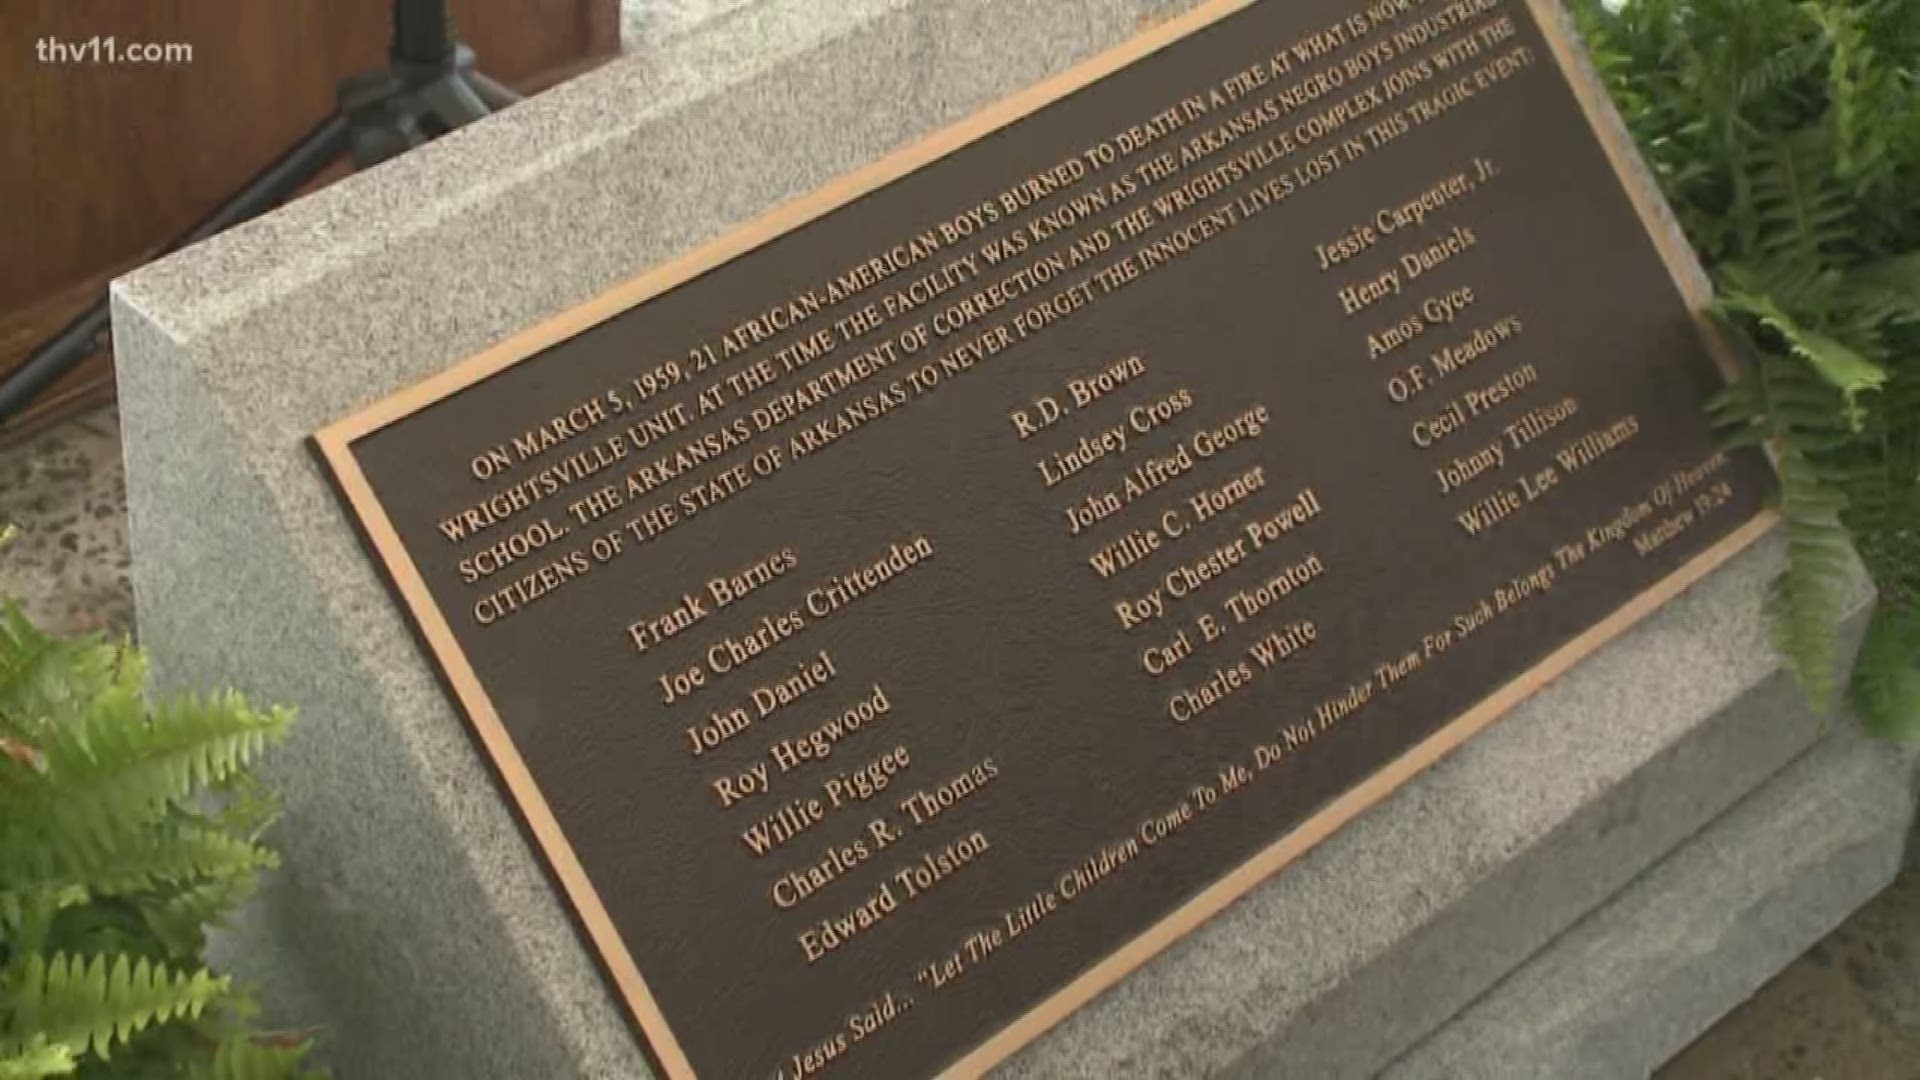 There's a new memorial marking a tragic history.